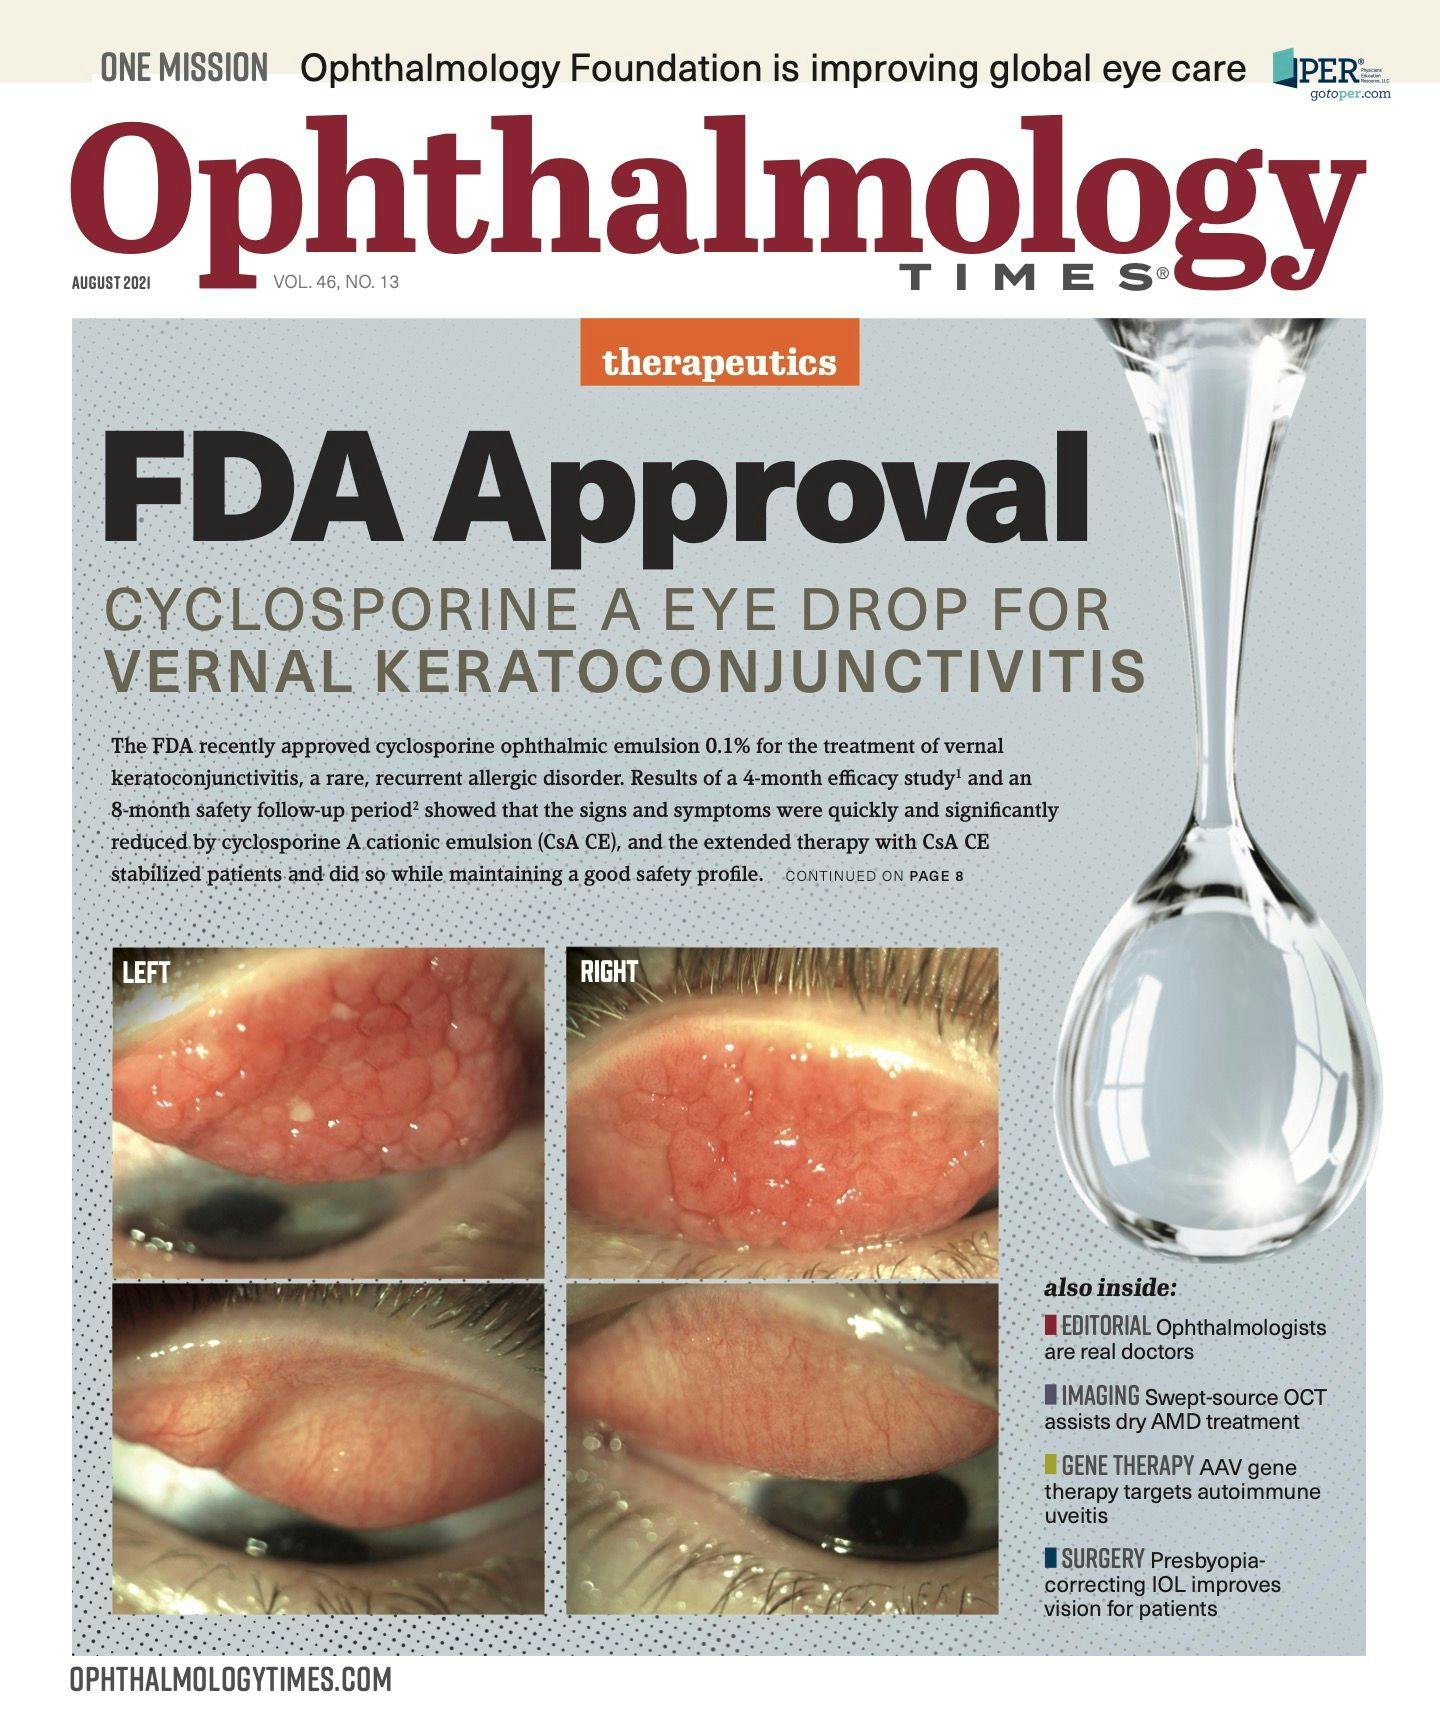 Ophthalmology Times: August 2021